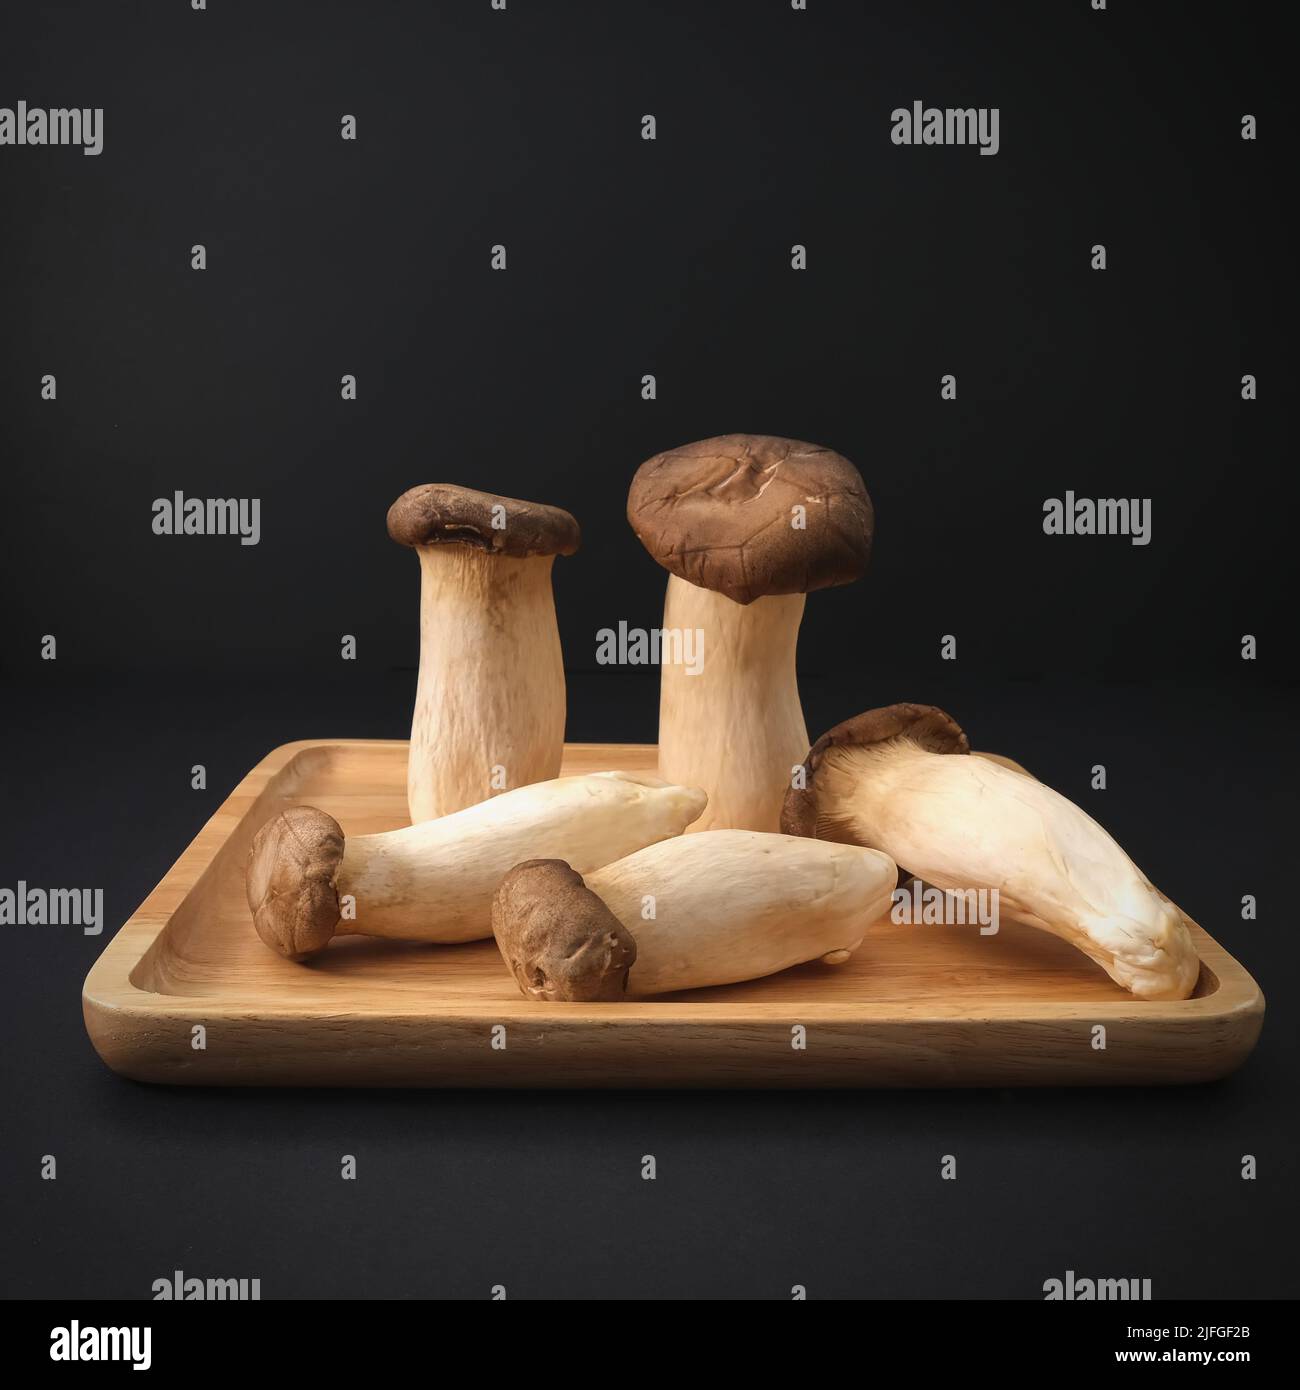 Popular uncooked healthy asian edible King Oyster mushrooms on wooden plate on black background. Asian cuisine. Stock Photo